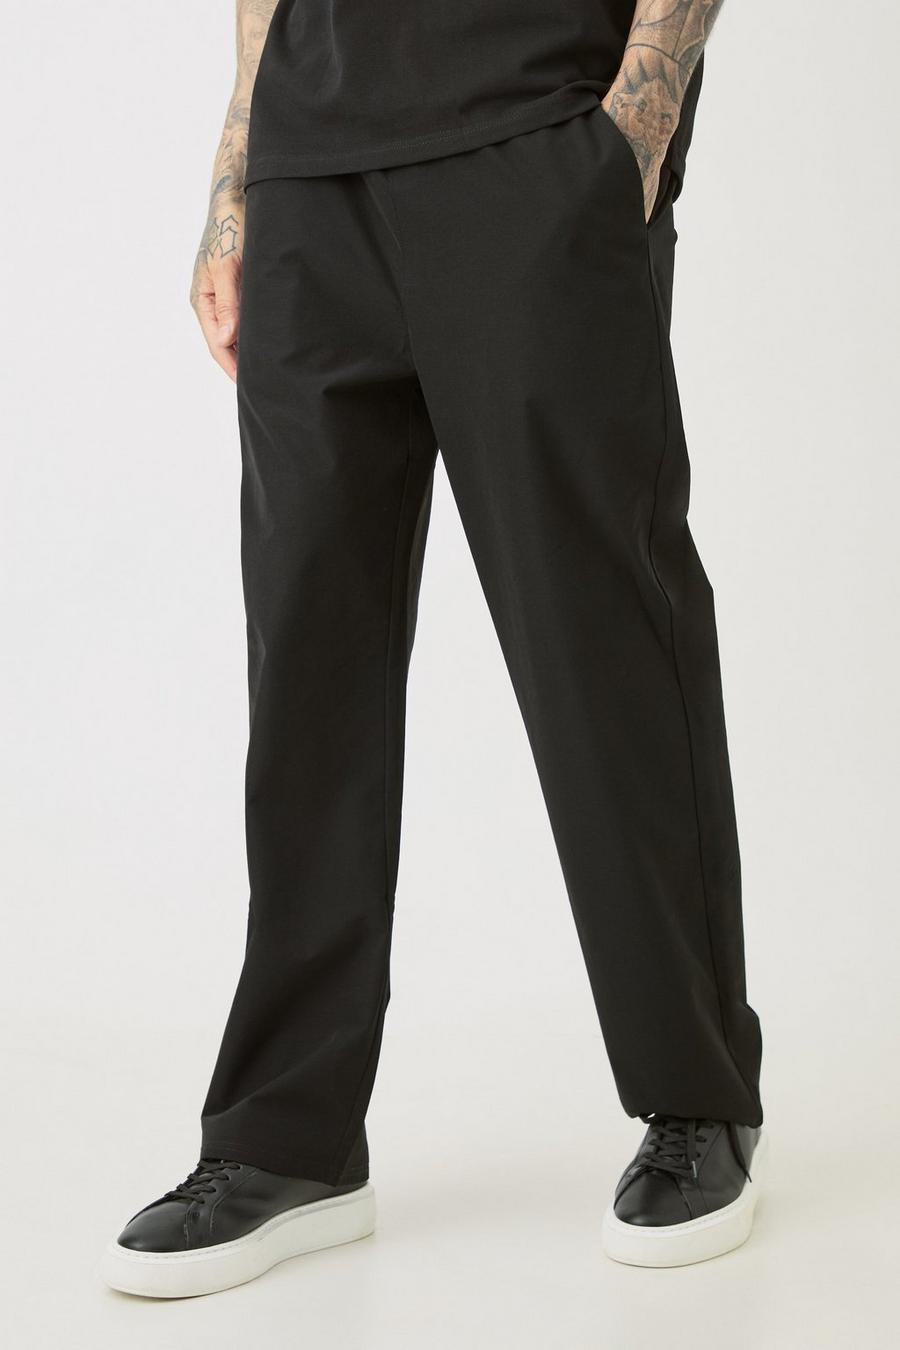 Black Tall Elasticated Lightweight Technical Stretch Relaxed Fit Trousers